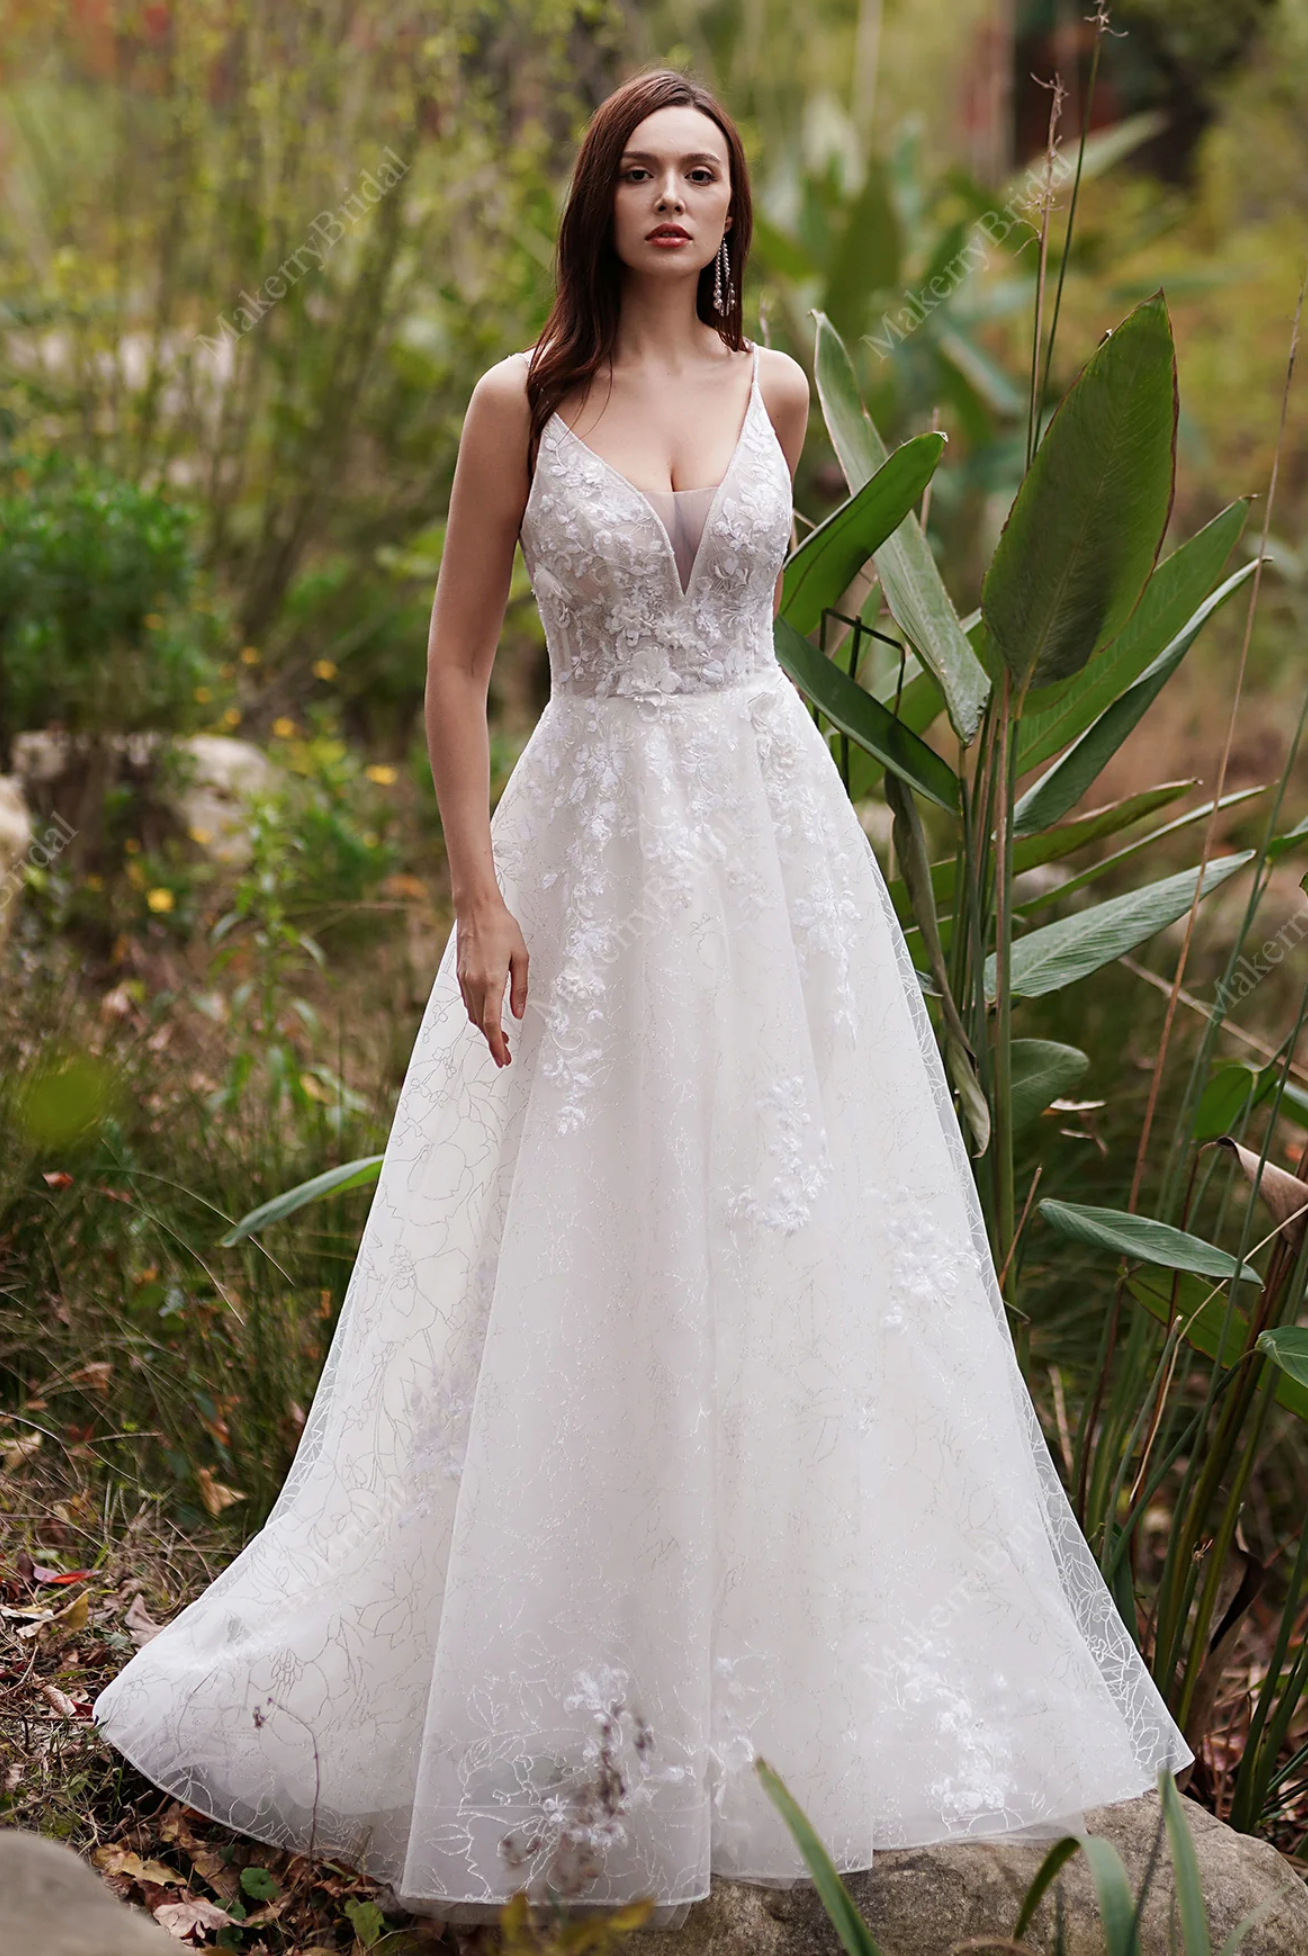 A Precious And Timeless Wedding Dress – TulleLux Bridal Crowns & Accessories